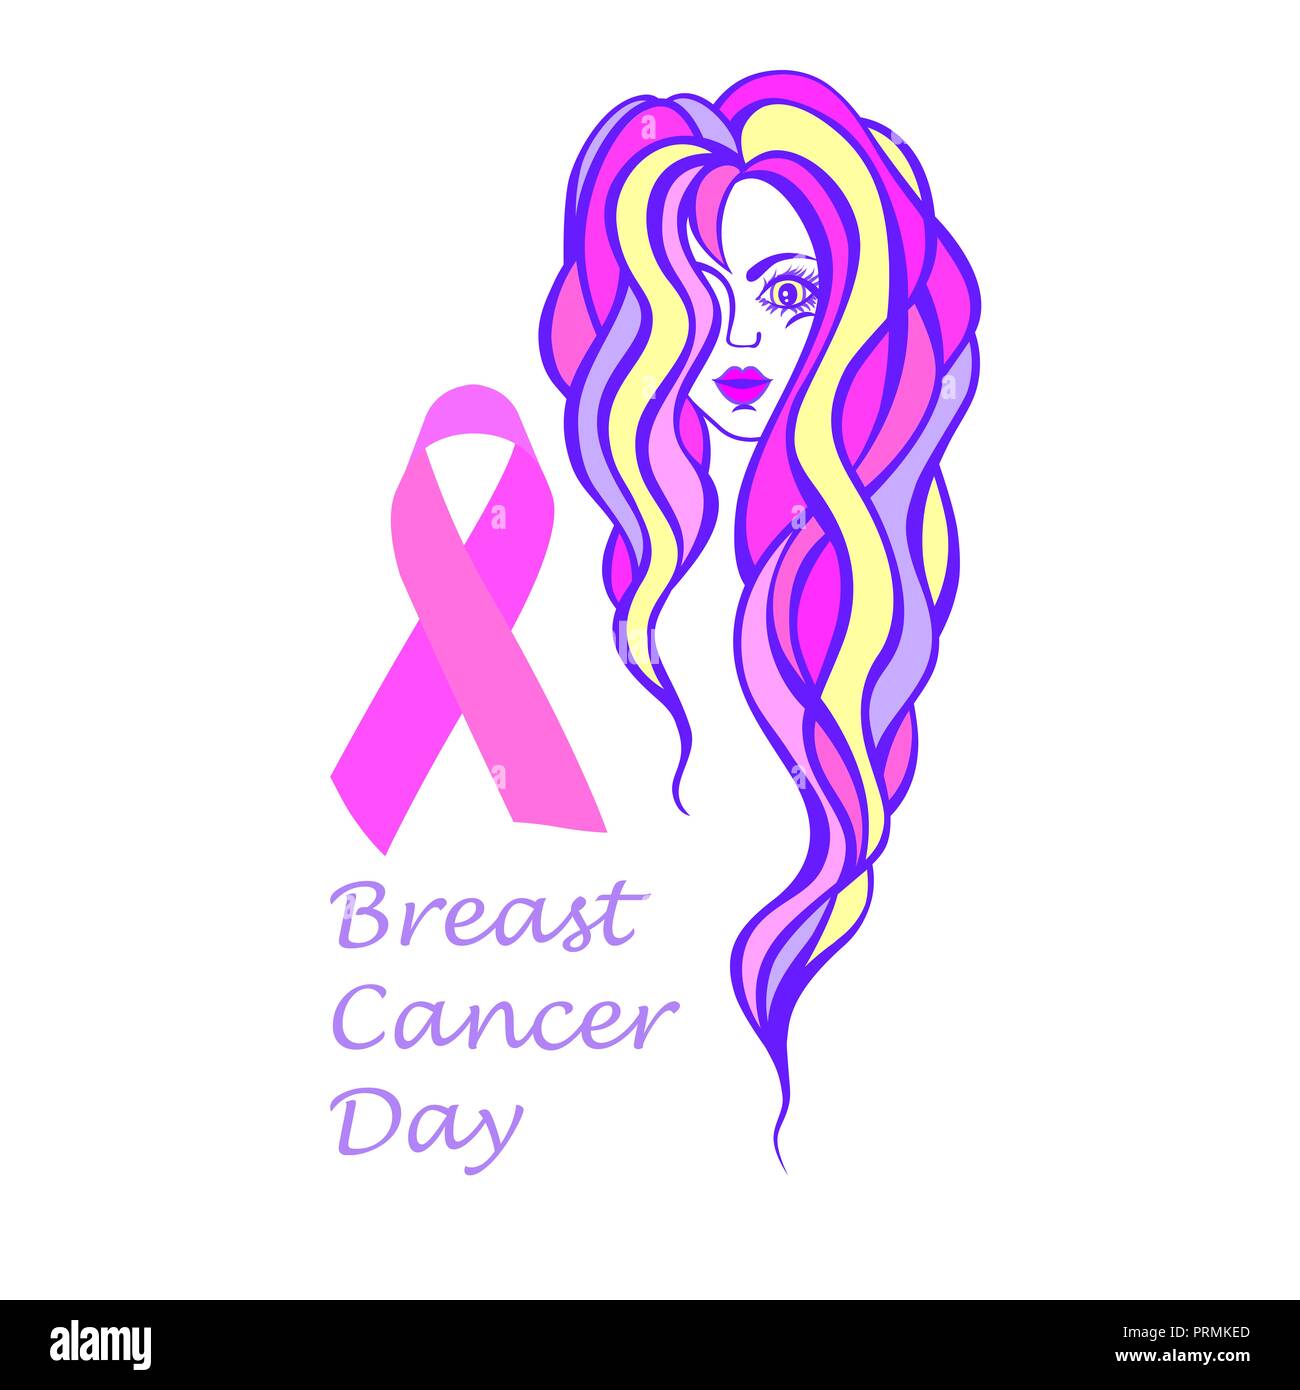 Breast cancer october awareness month campaign poster ribbon sign and woman silhouette over pink cause background. Stock Photo